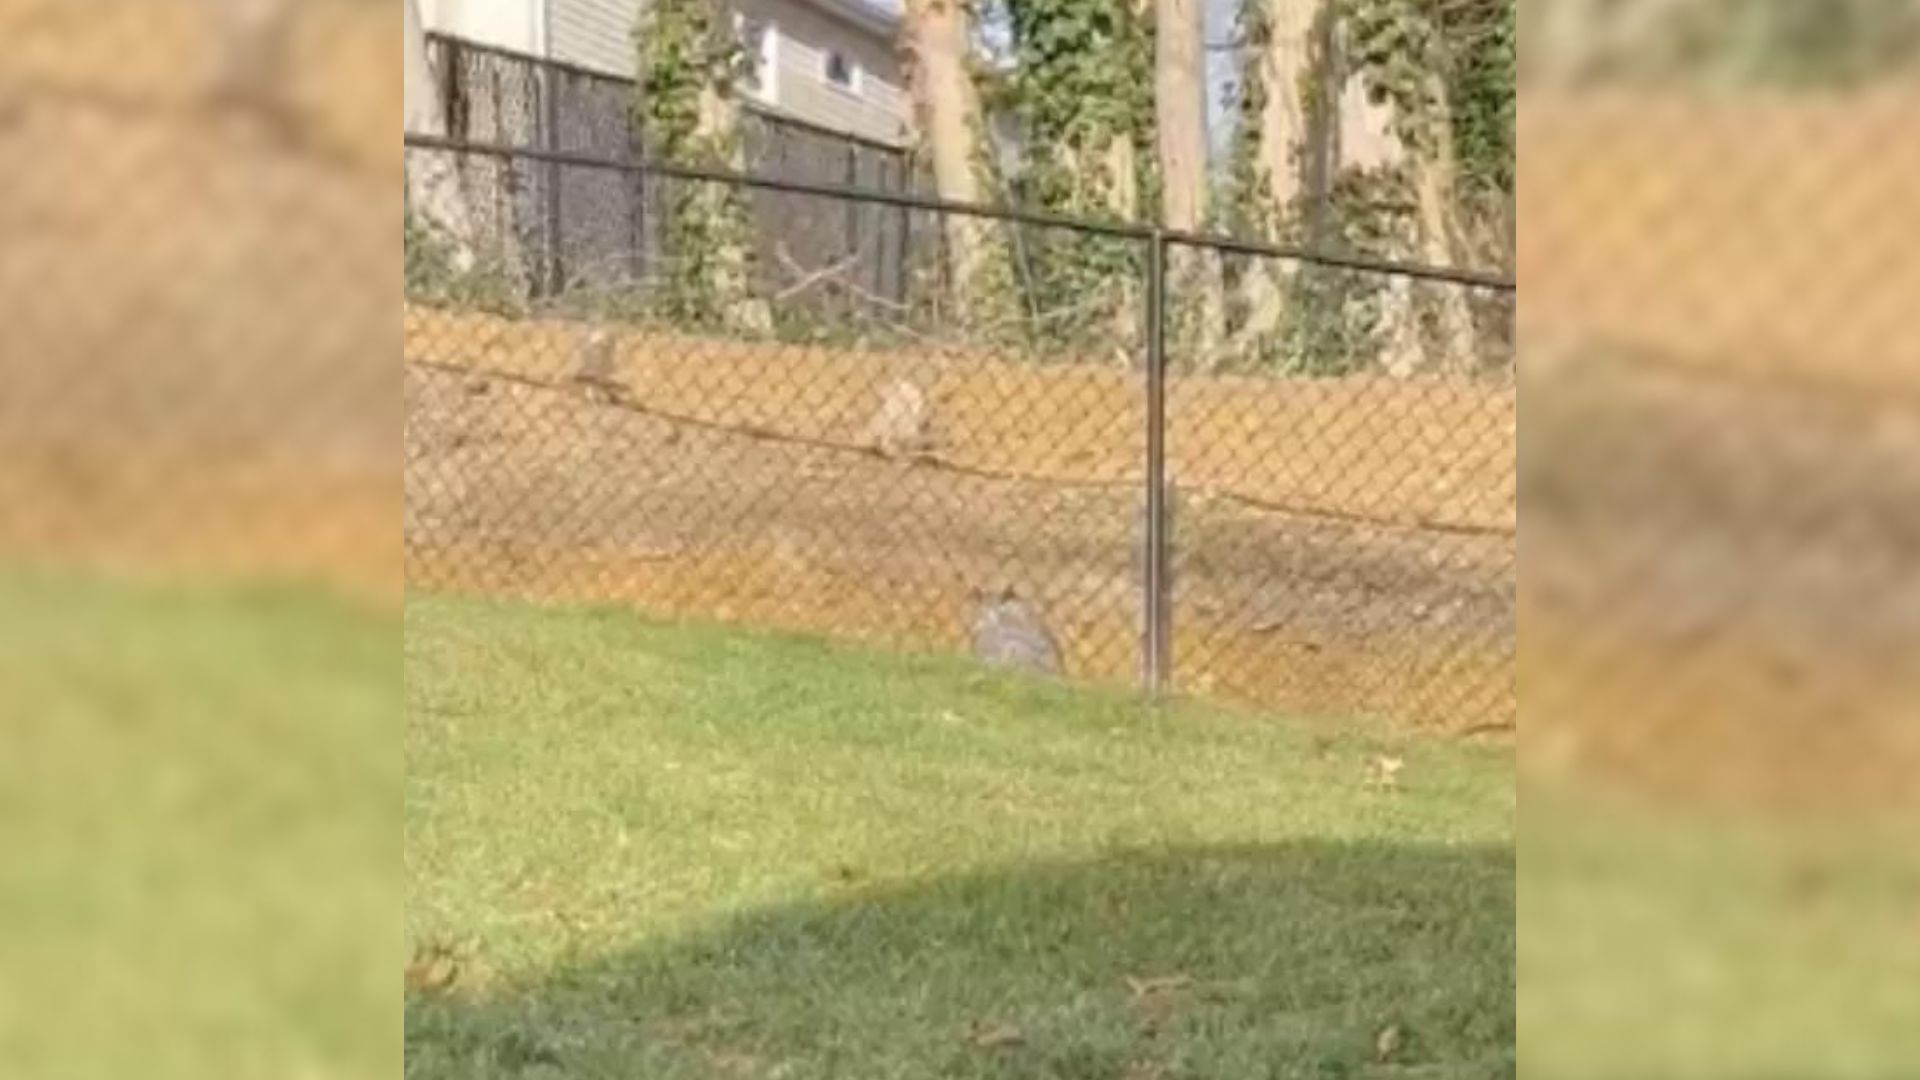 Man Saw A Brown Lump Near His Fence And Went To Investigate What It Was